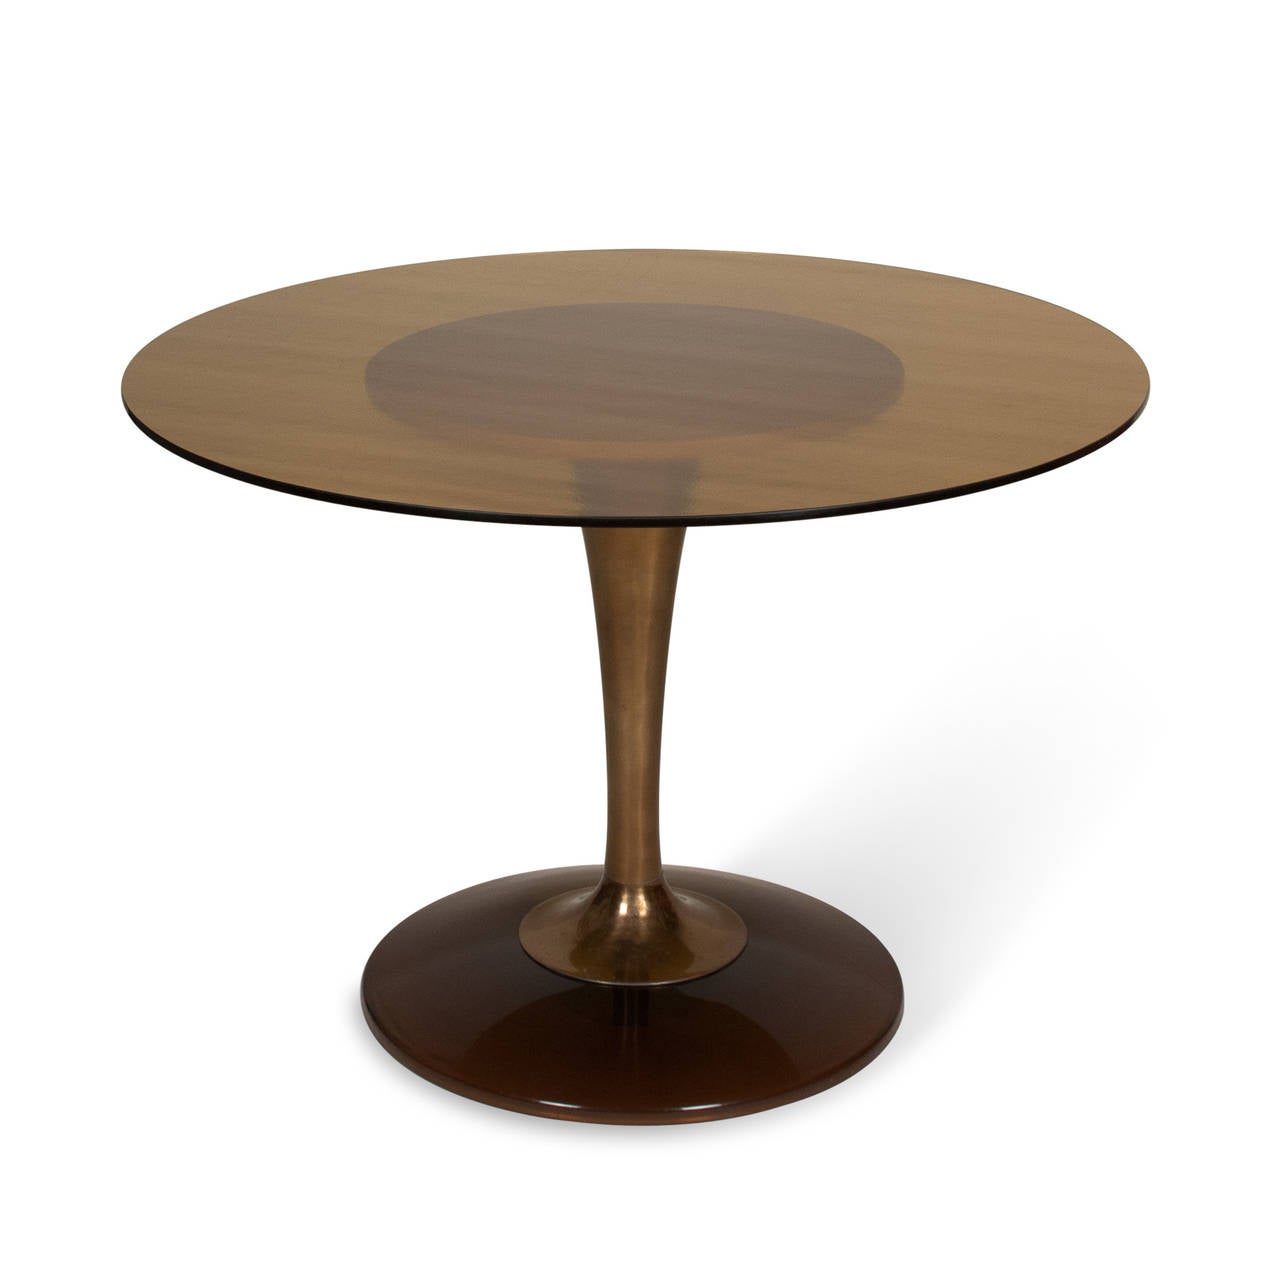 American Amber Glass-Top Tulip Dining Table and Chairs For Sale